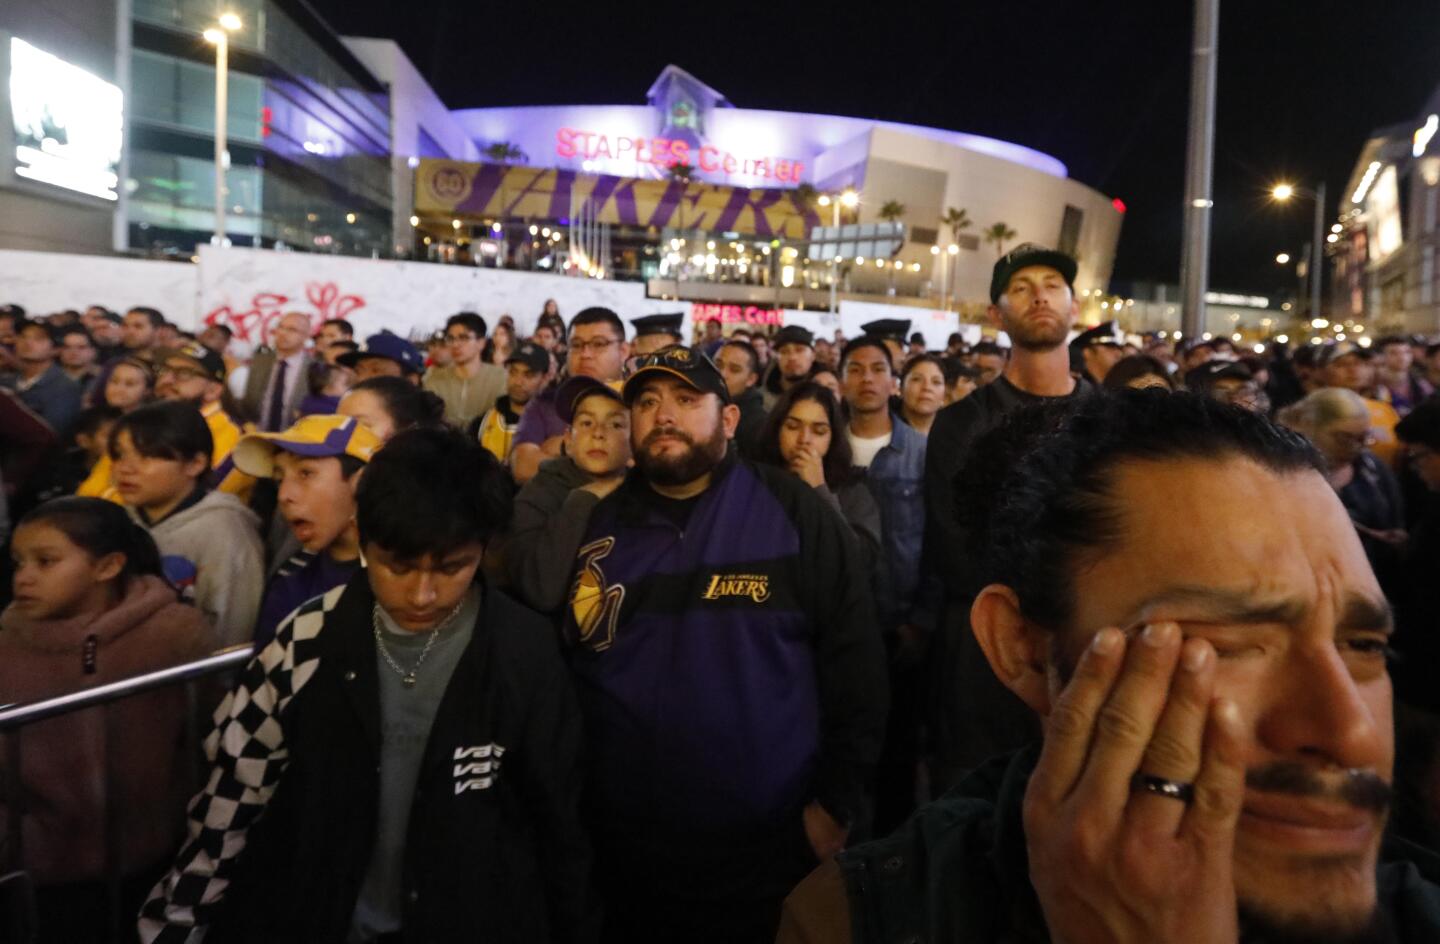 Joseph Hernandez, right, wipes a tear while watching a pregame tribute to Kobe Bryant with hundreds of fans standing outside Staples Center on Jan. 31, 2020.